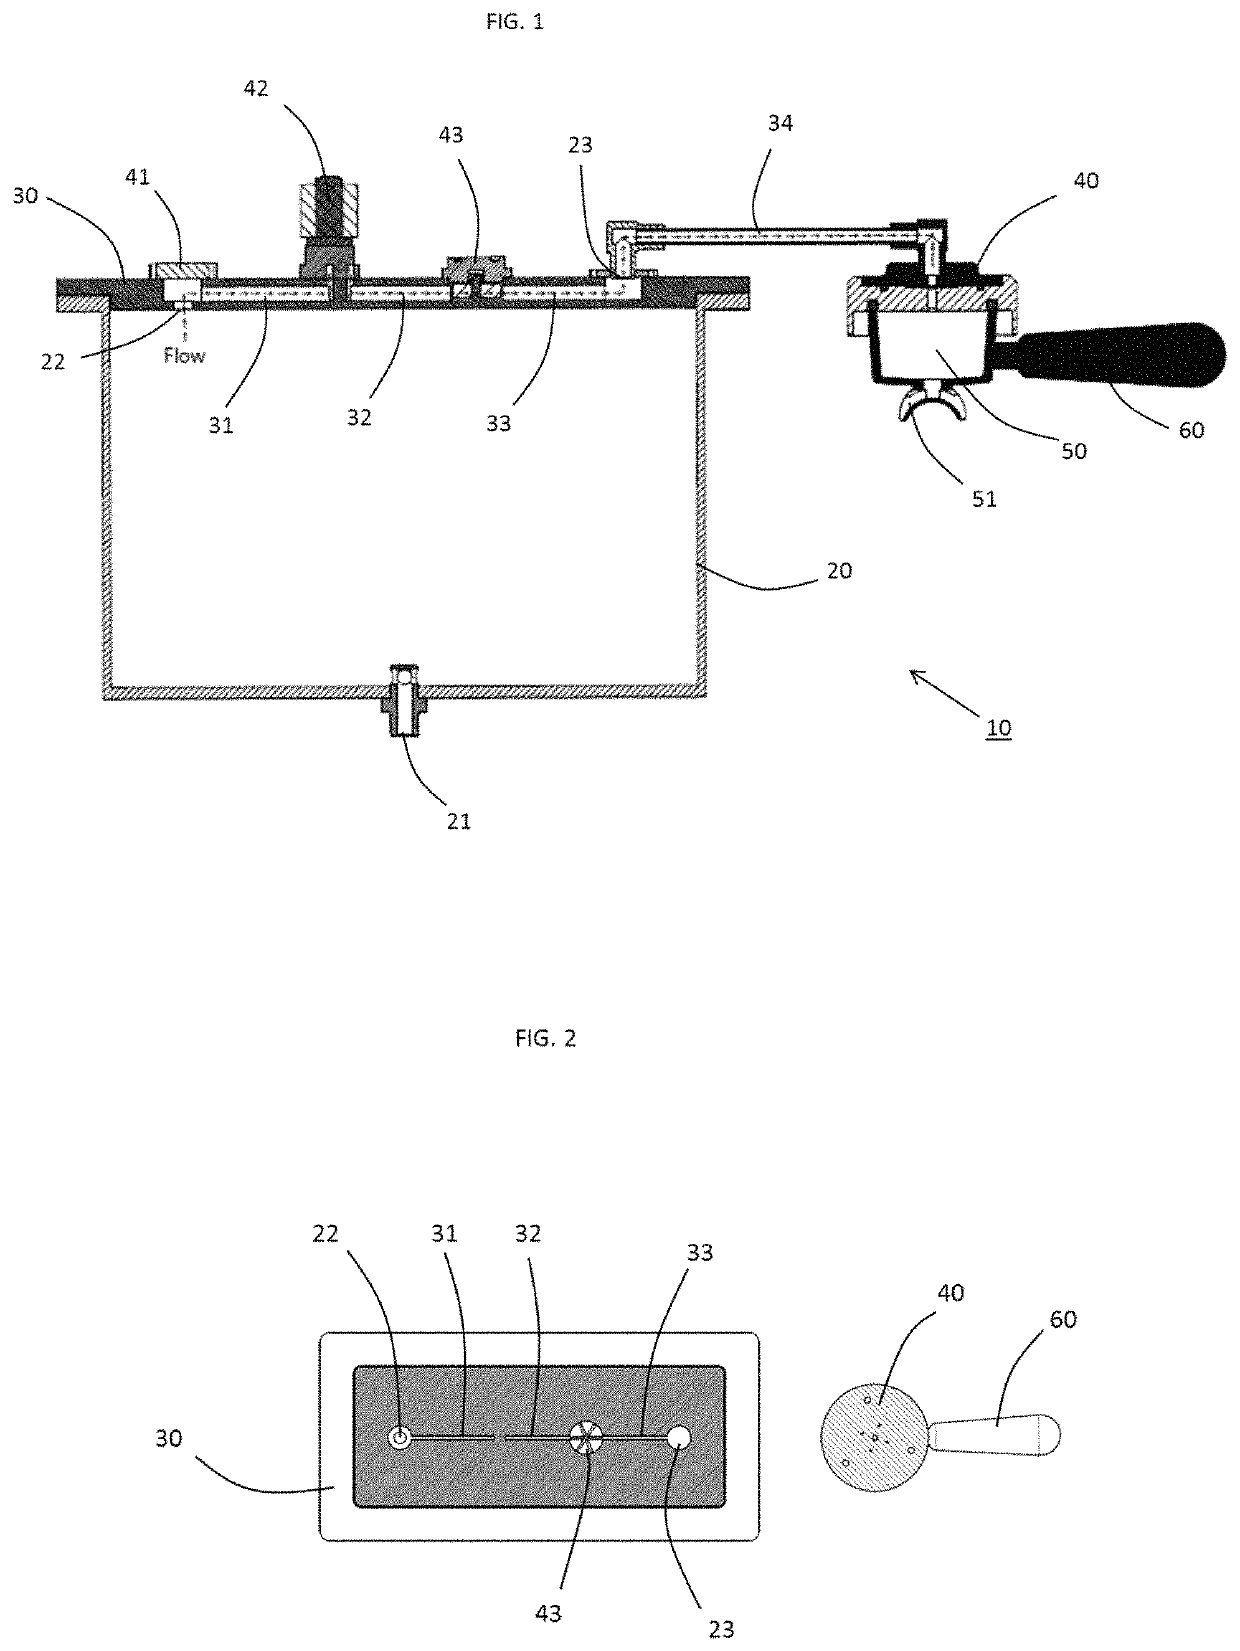 Apparatus for brewing and dispensing beverages